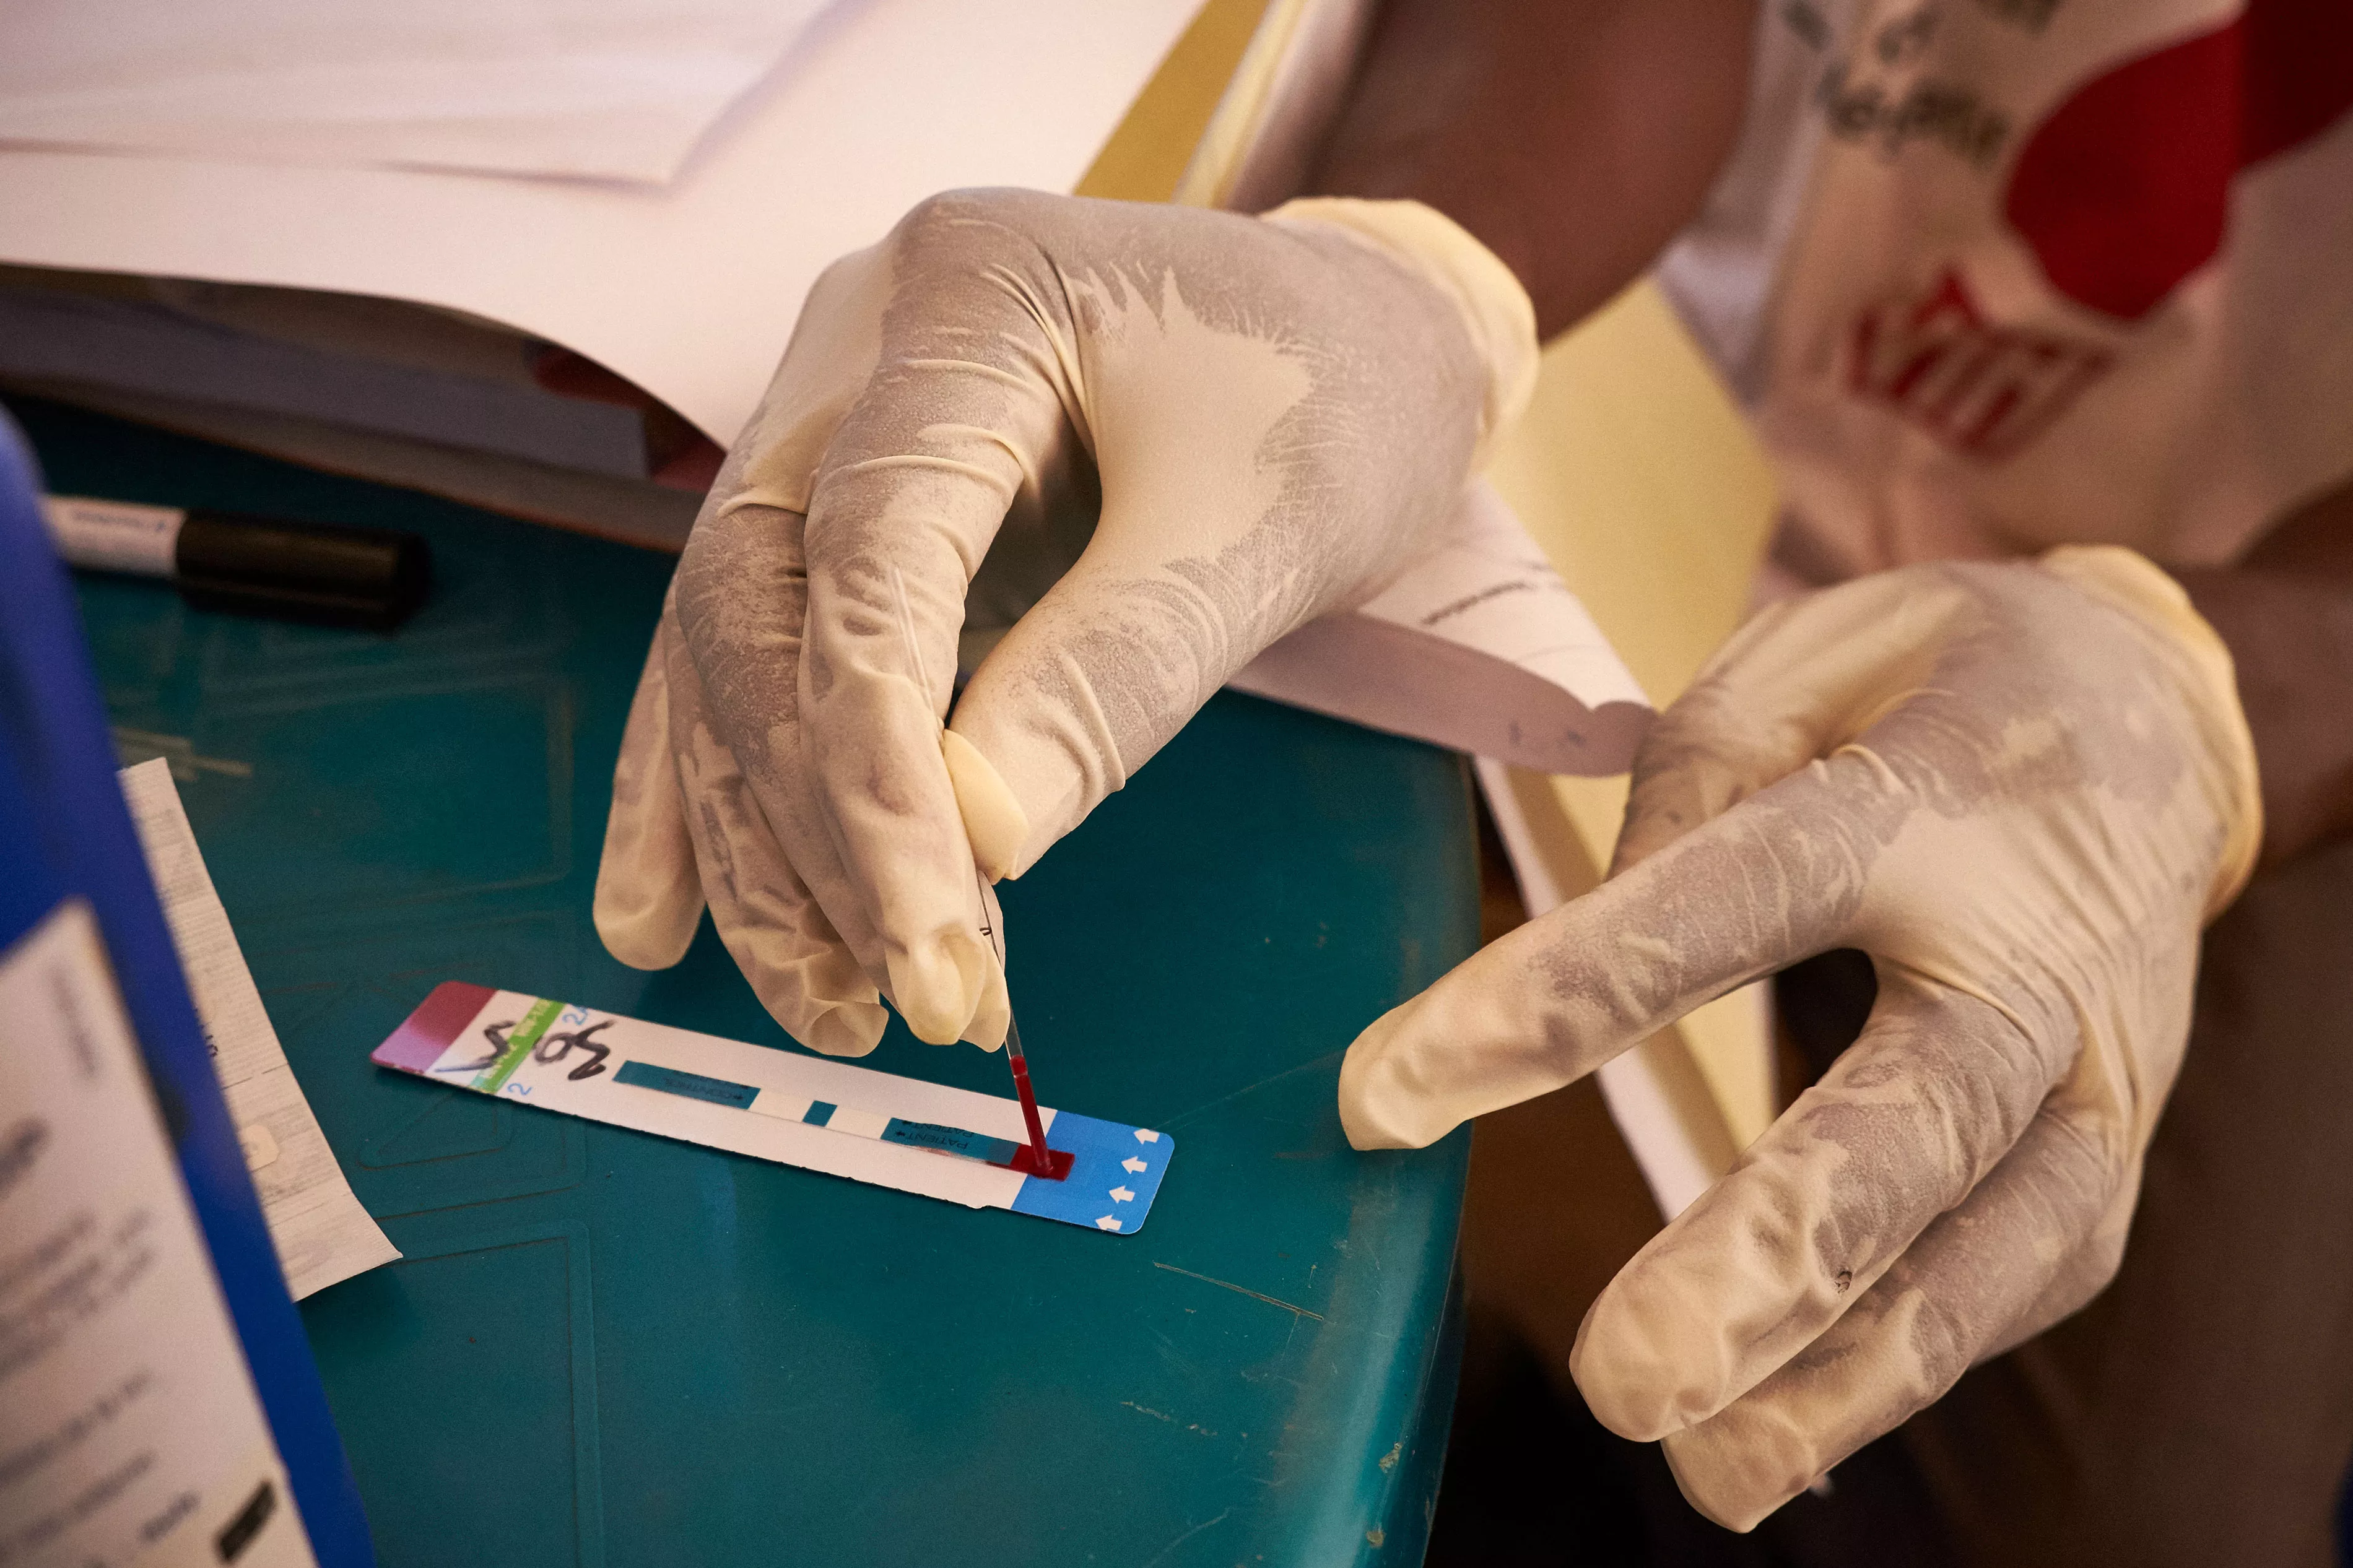 HIV activist Boubacar Camara tests a man for HIV at the Médecins Sans Frontiers (MSF) mobile clinic in the neighbourhood of Tombolia, Conakry, Guinea on March 18, 2016. 